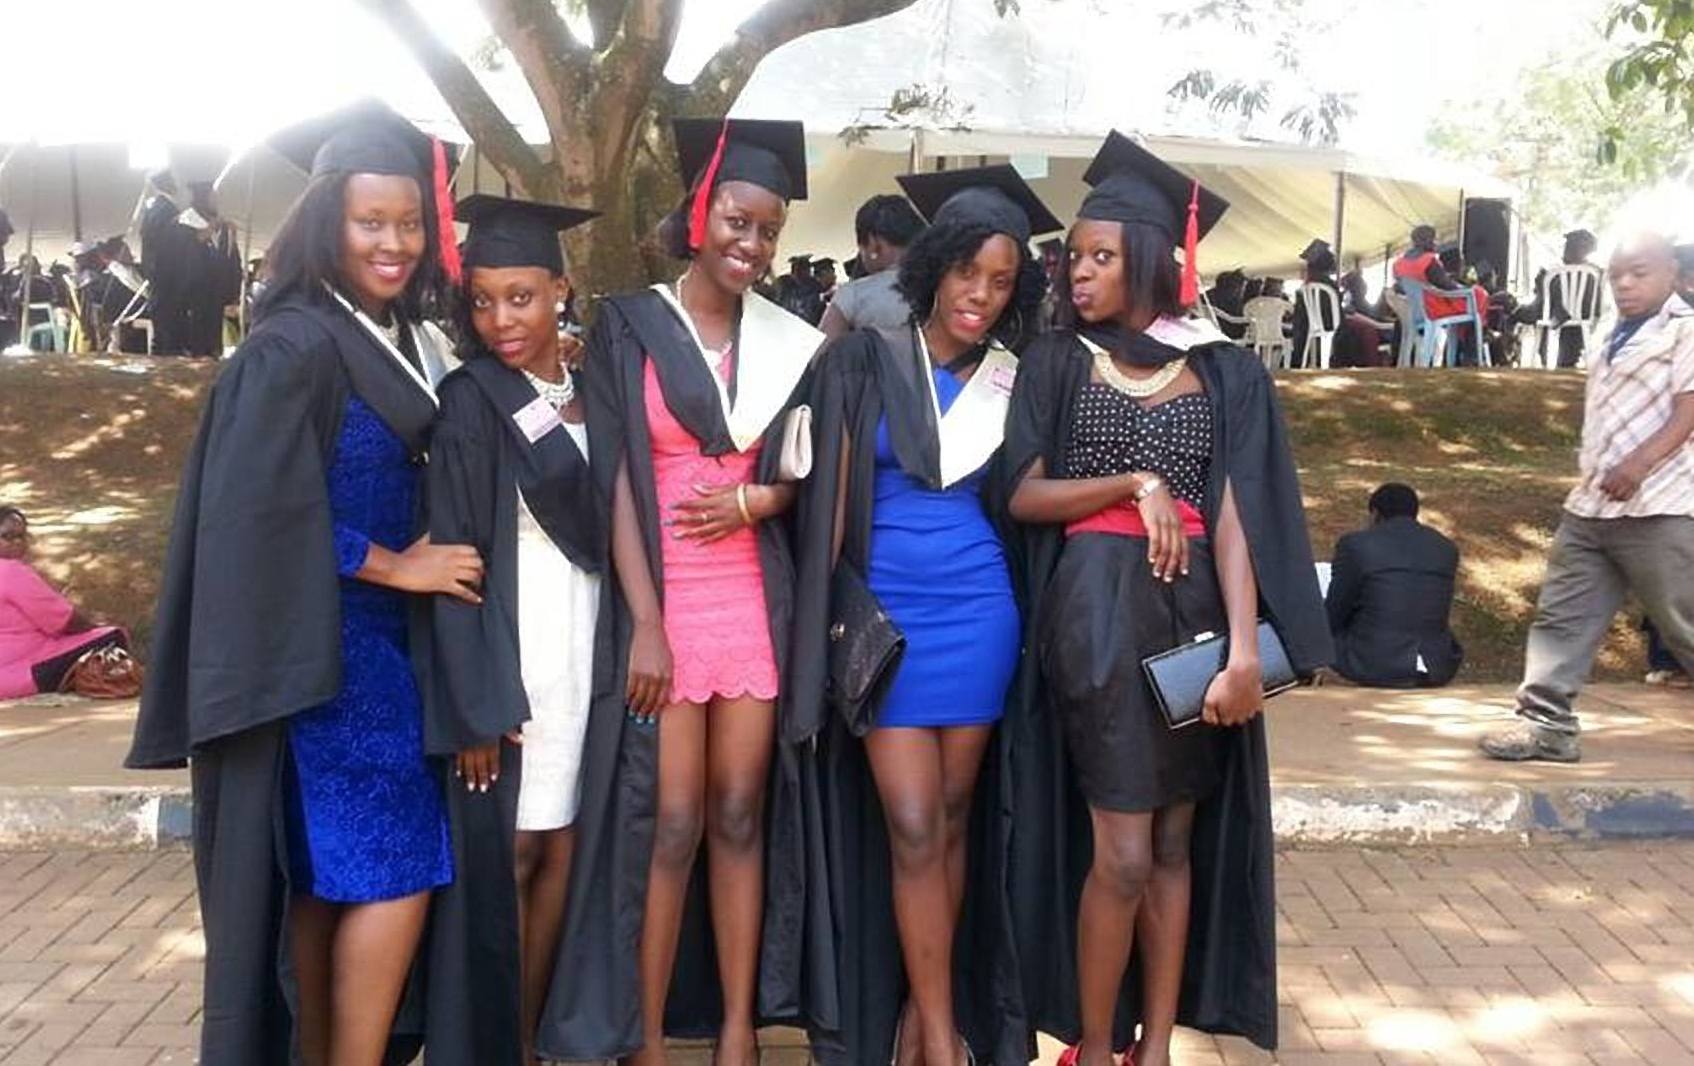 Makerere Girls Free To Dress In Style Sex For Marks Committee Slams Dress Code Critics In Fresh